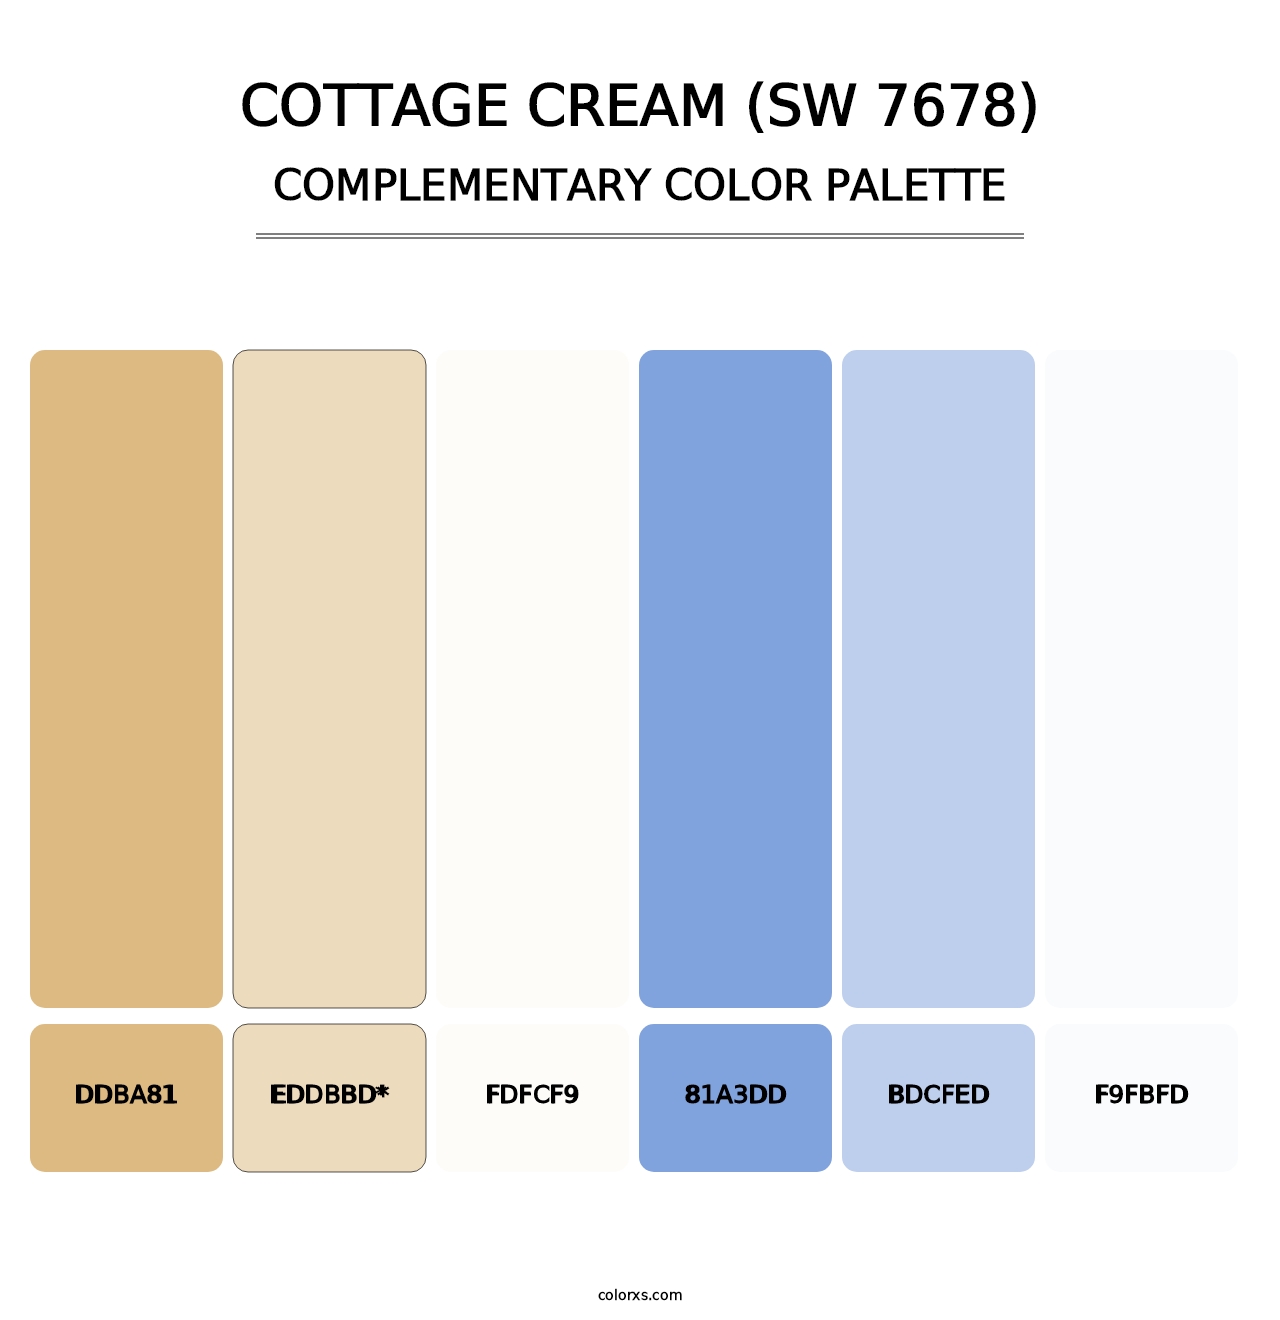 Cottage Cream (SW 7678) - Complementary Color Palette